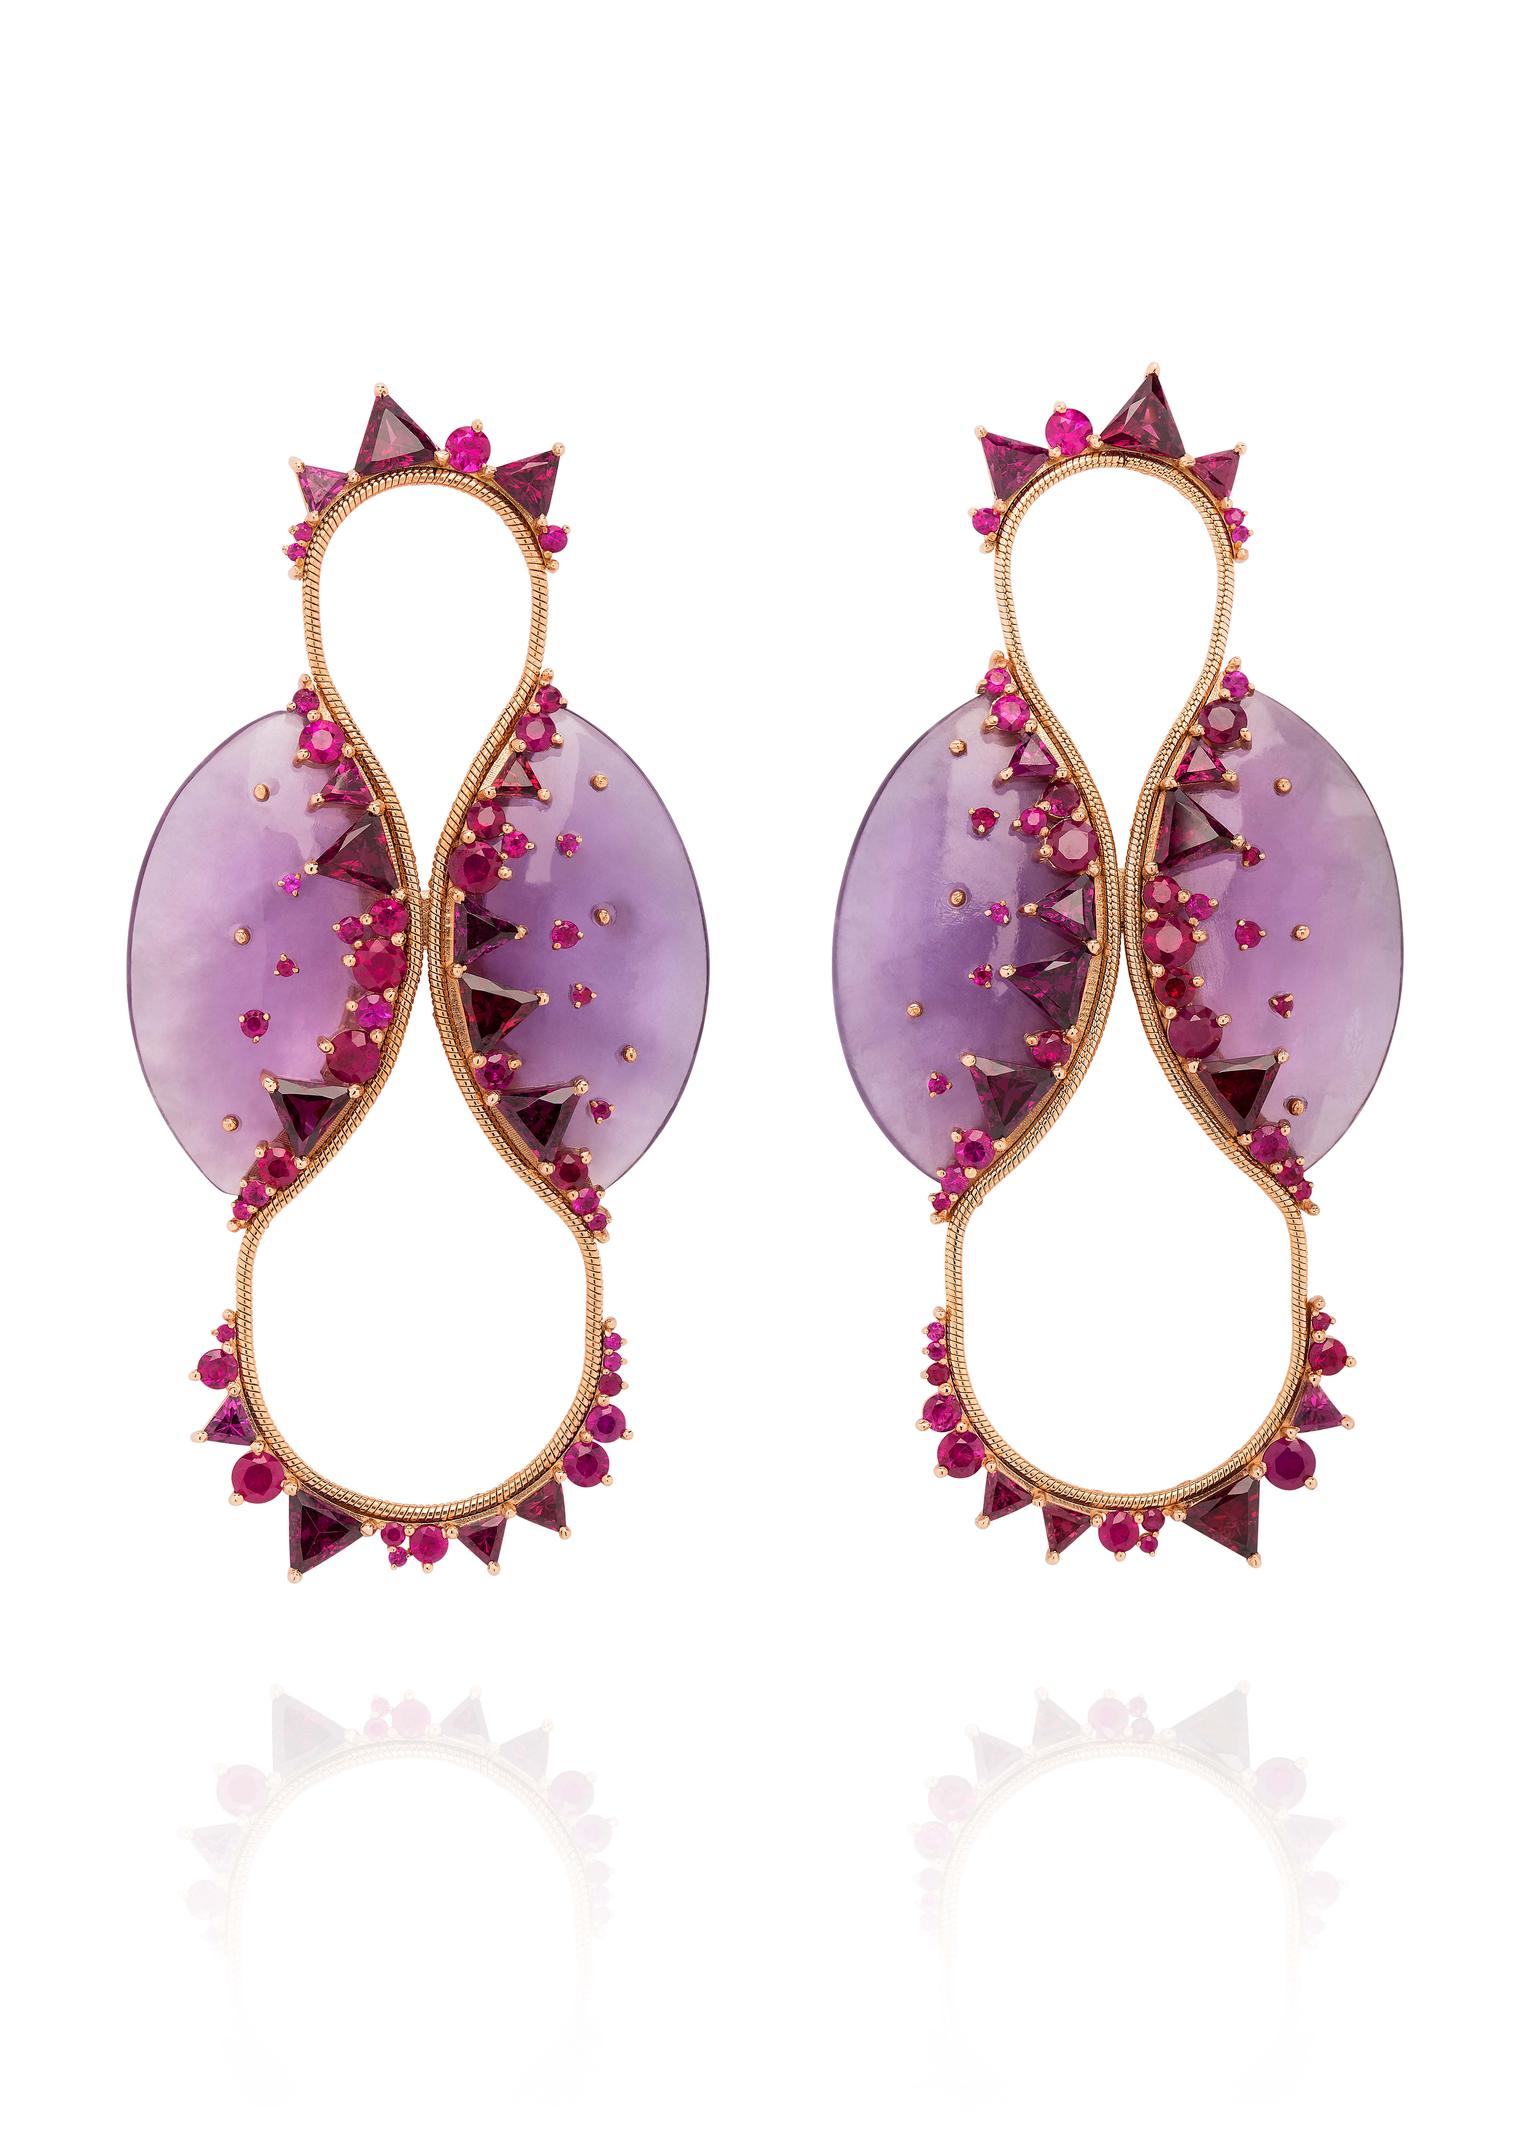 Fernando Jorge Fusion Circle earrings in rose gold with rubies, rhodolites and amethyst.